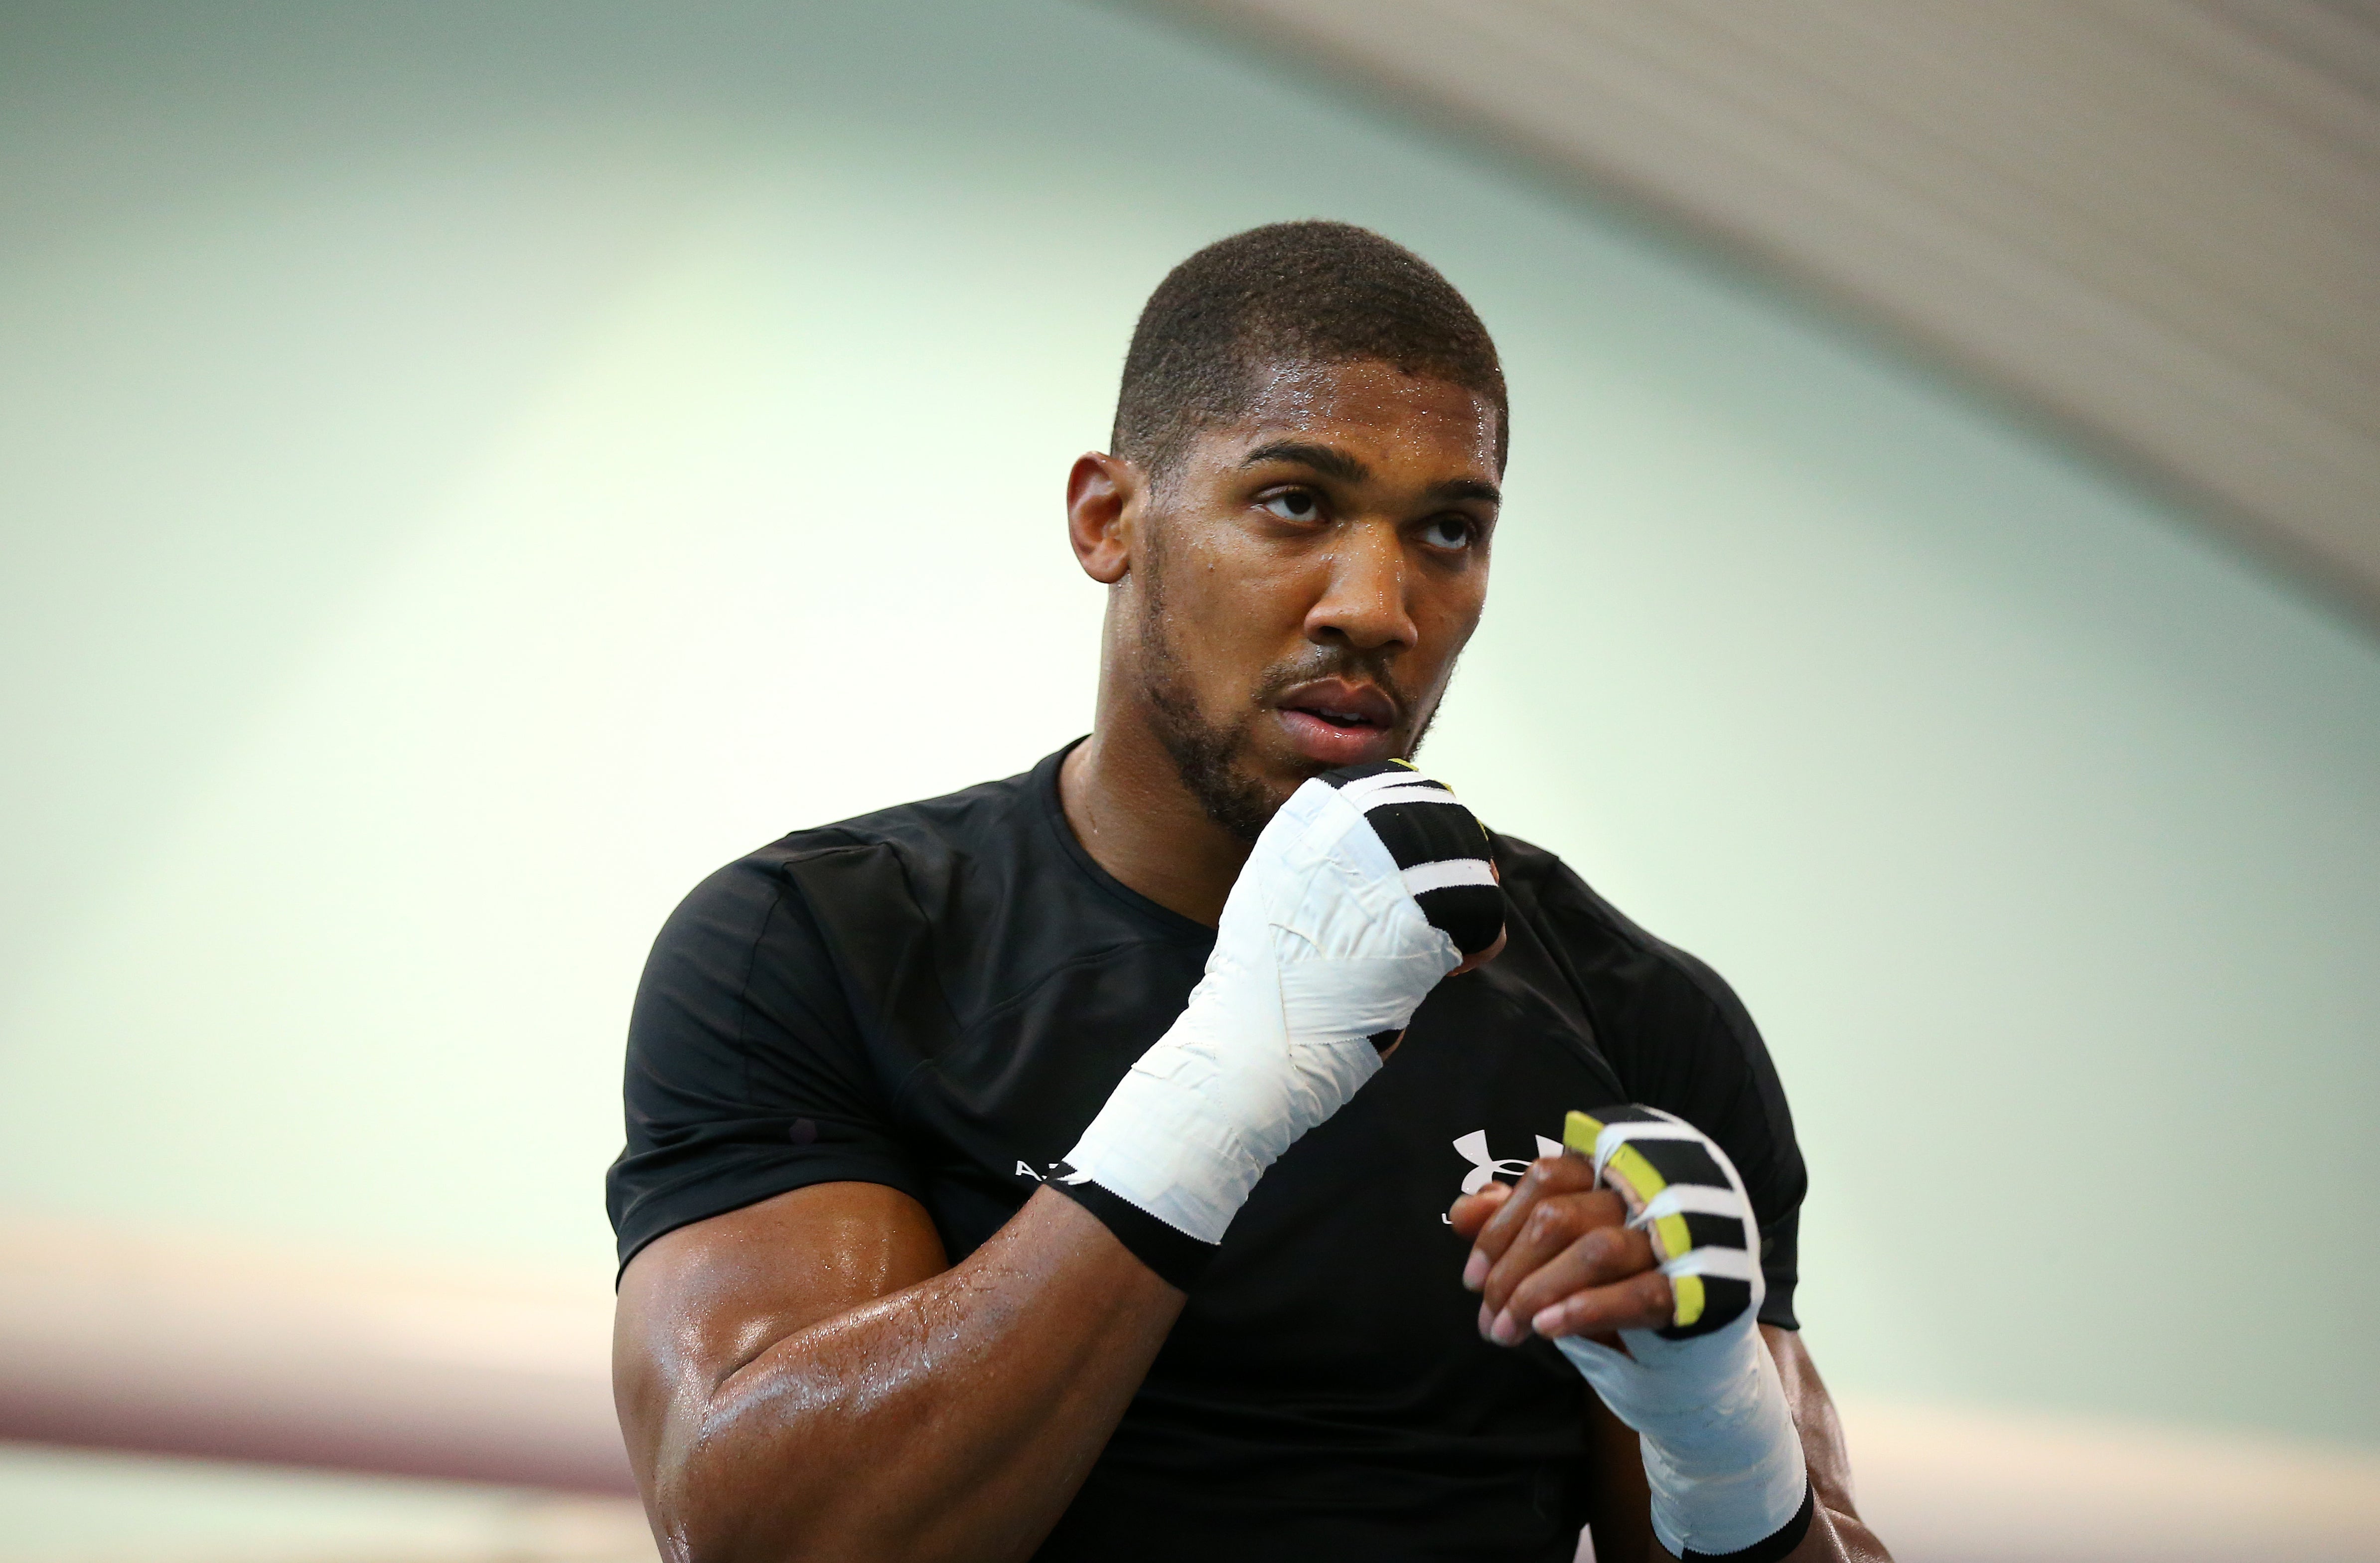 Anthony Joshua is set to return to the ring for the first time this year